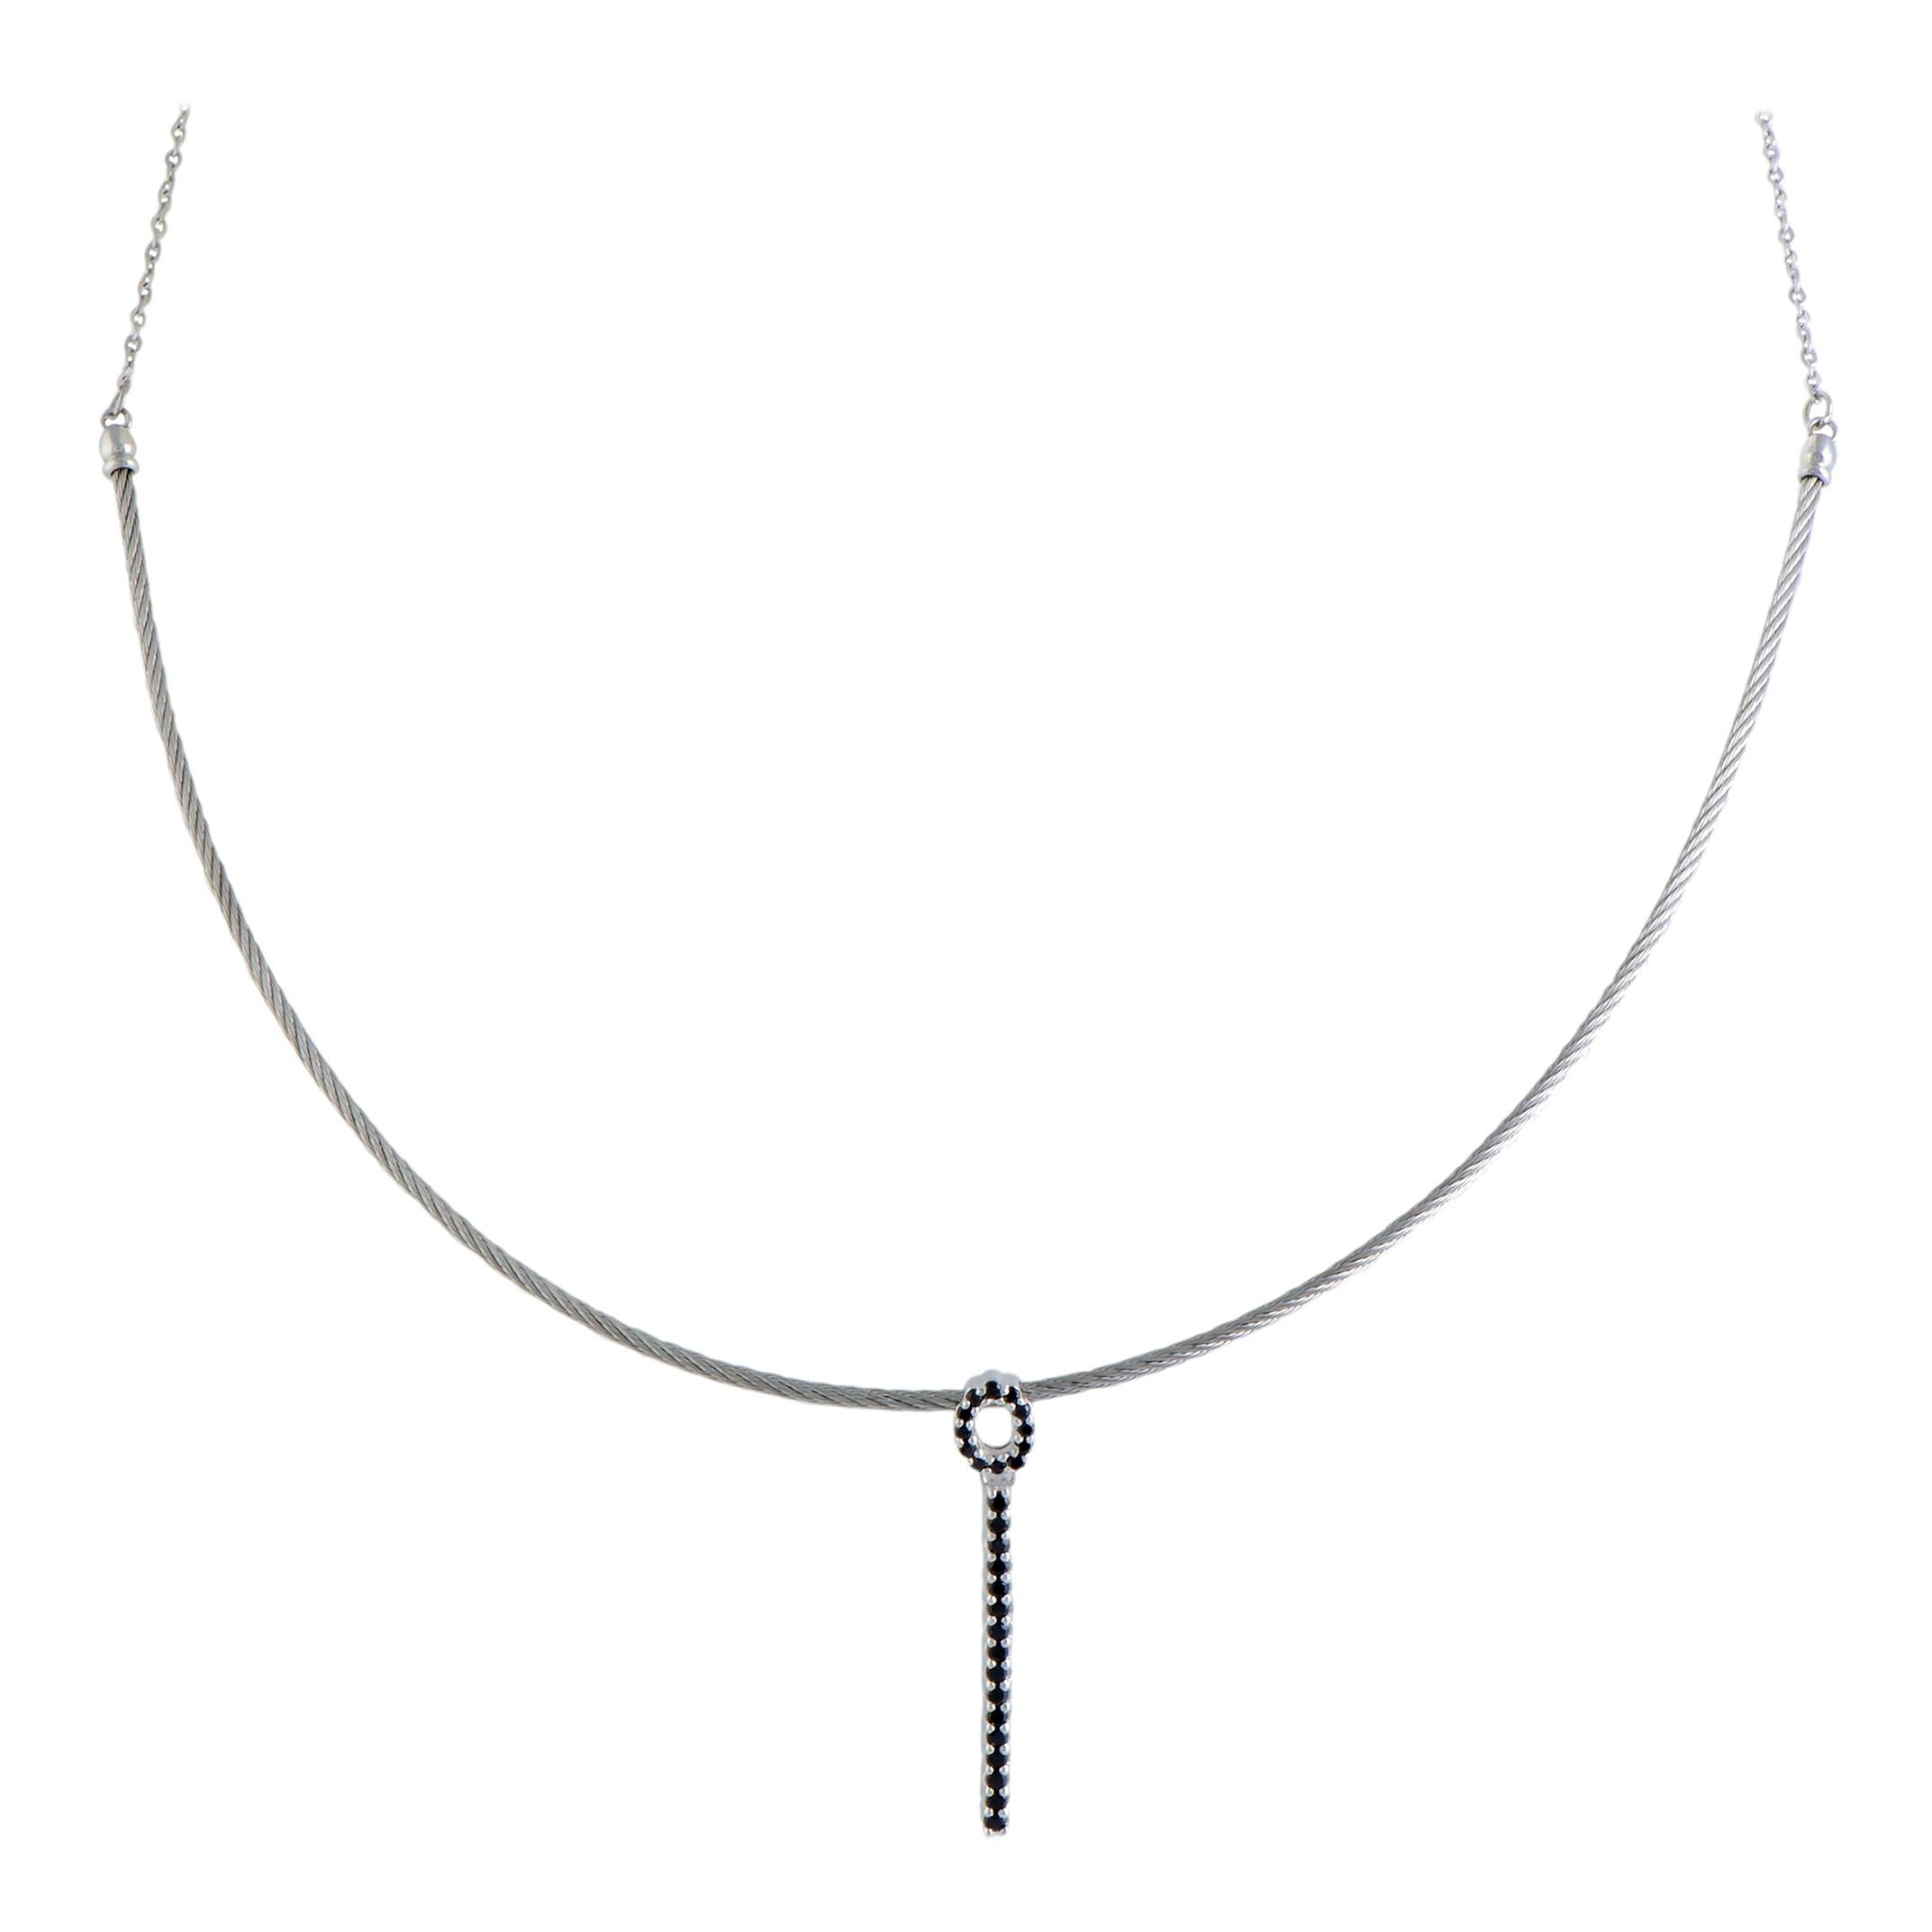 Charriol Laetitia Stainless Steel Black Spinels Petite Pendant Cable Necklace